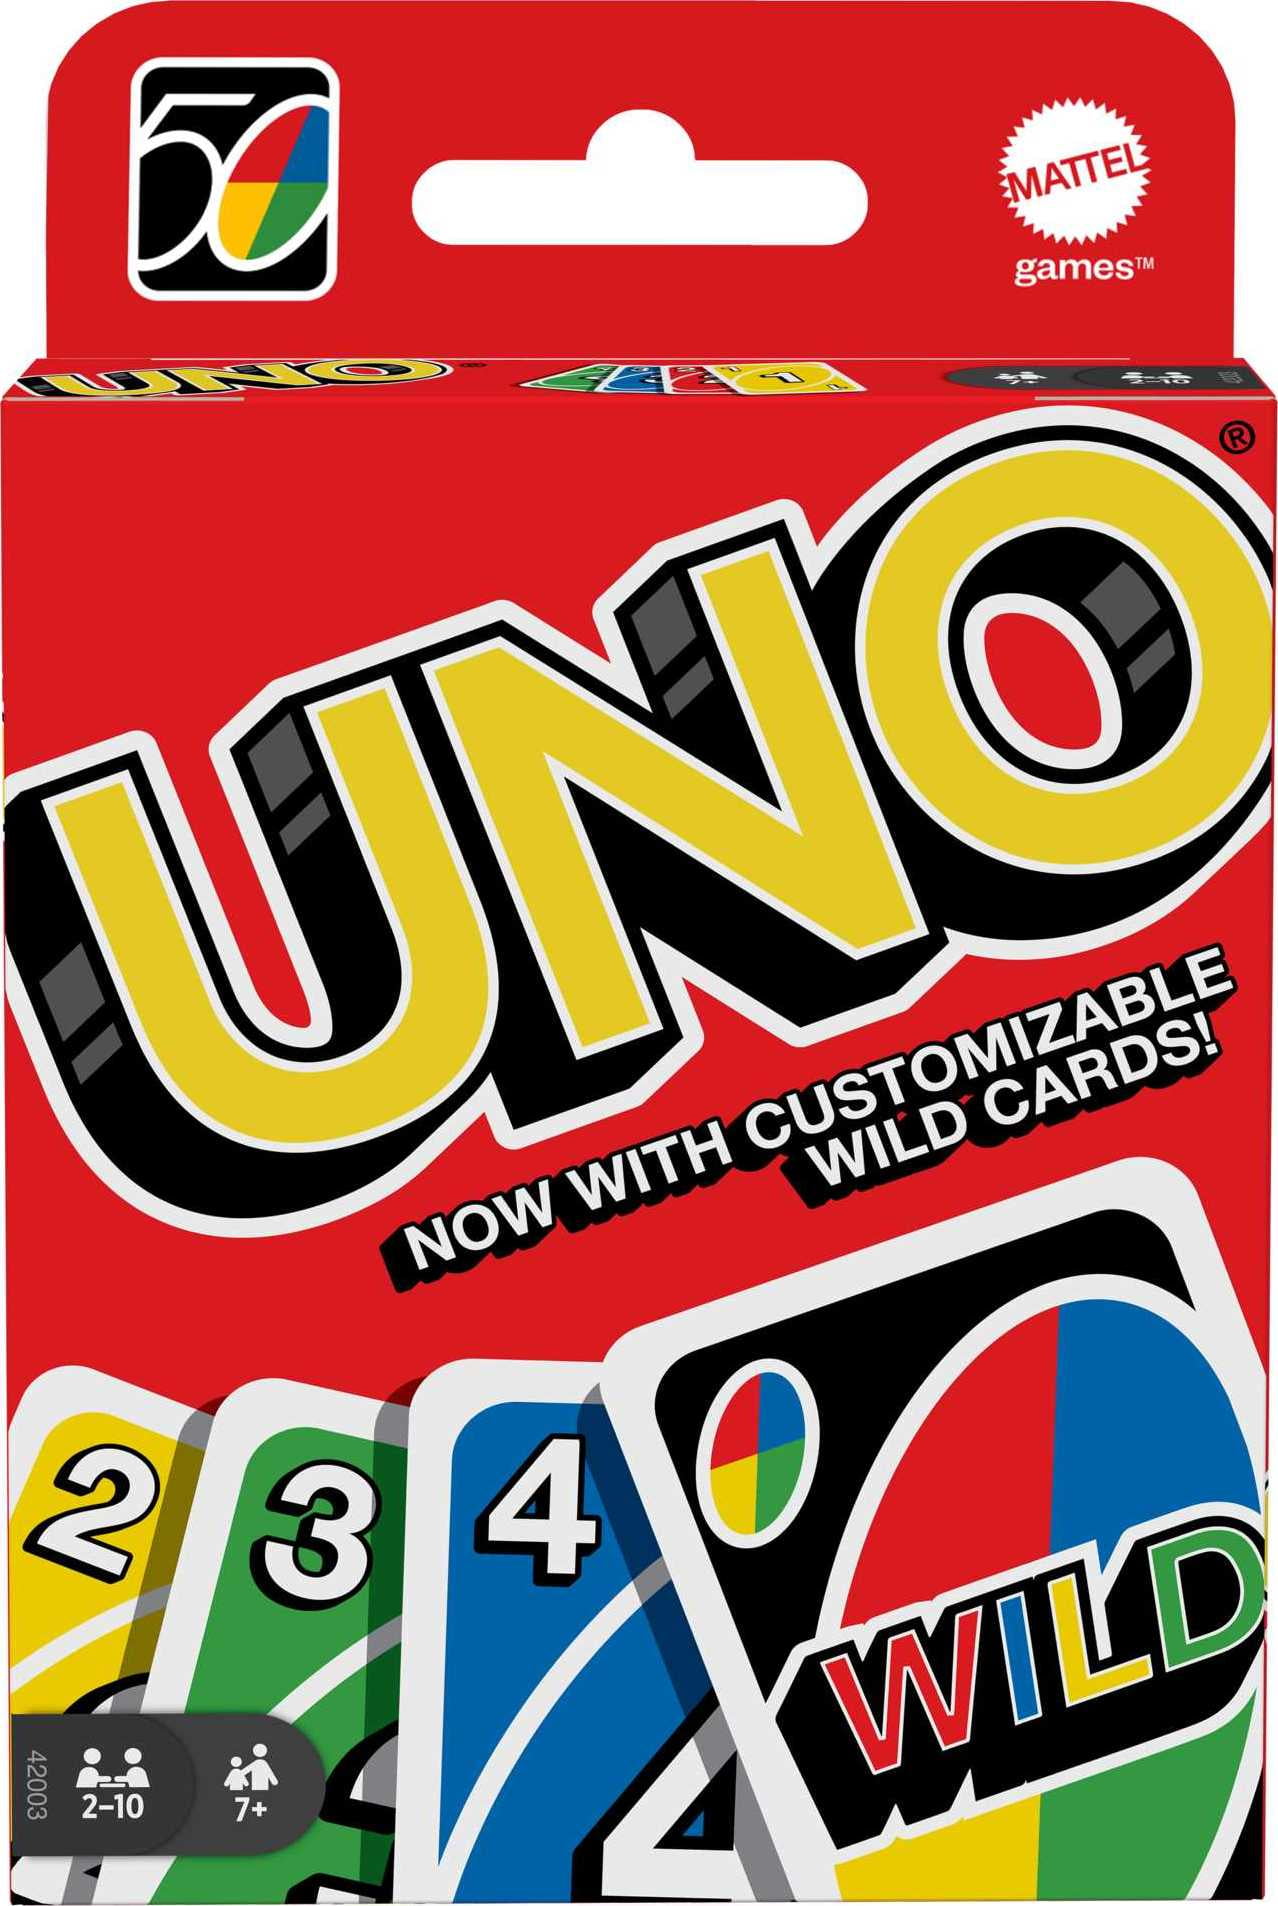 UNO & DOS Family Card Games for 2-10 Mattel Players 2 Games 